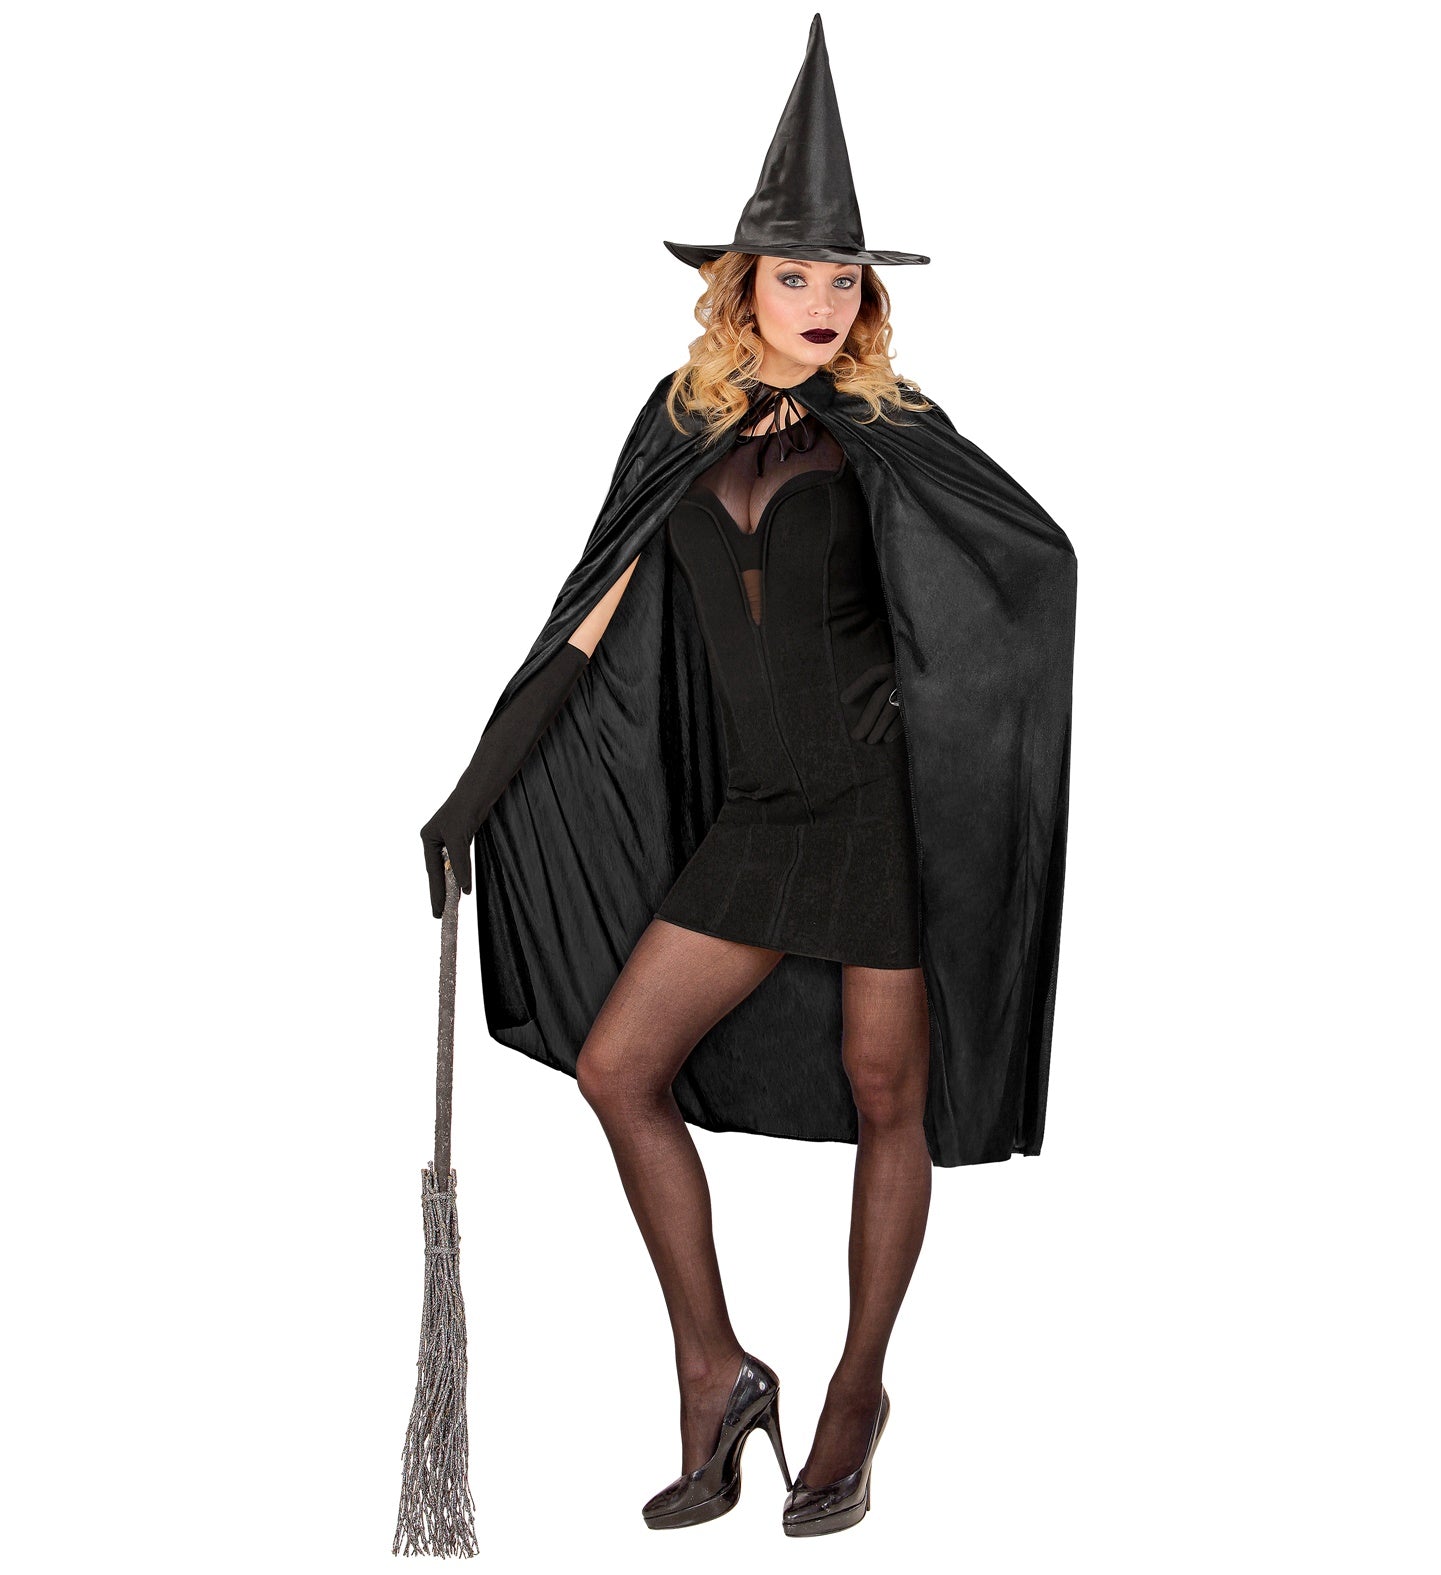 Black Cape 110cm for witch costume